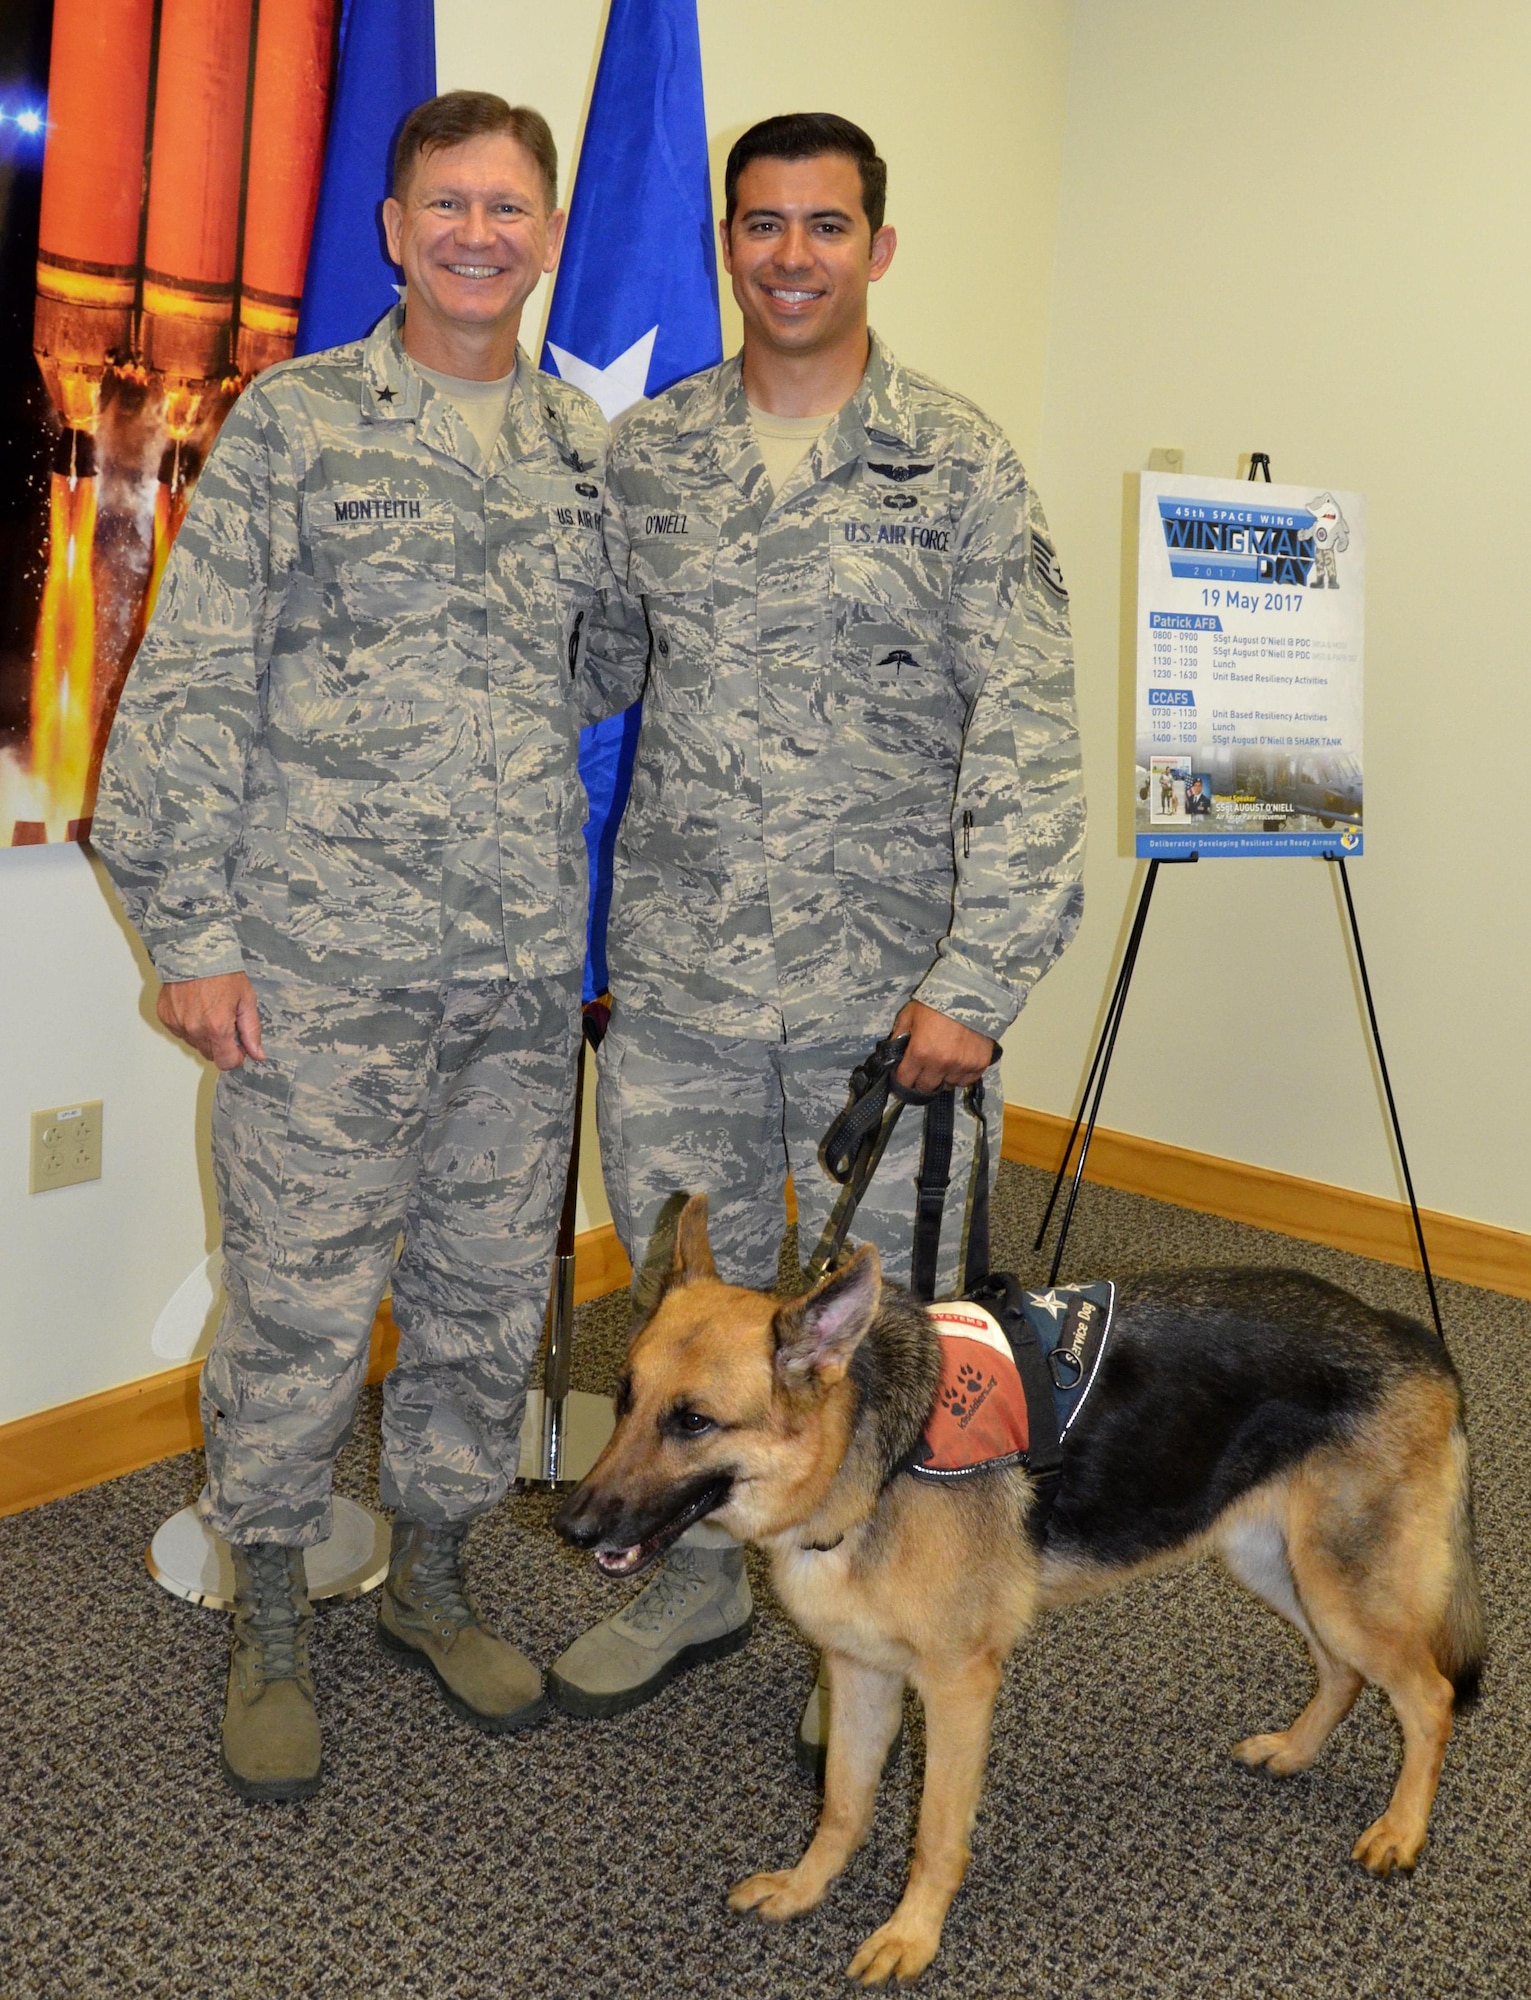 Brig. Gen. Wayne R. Monteith, (left), 45th Space Wing commander, Staff Sgt. August O’Niell, pararescueman and O'Niell's service dog Kai, pose after O'Niell gave a presentation on resiliency to 45th Space Wing Airmen May 19 as part of Wingman Day. O'Niell embarked on a 2011 deployment to save lives when he was shot through both legs during a combat rescue mission in Afghanistan. (U.S. Air Force photo SrA Brandon Kalloo Sanes)